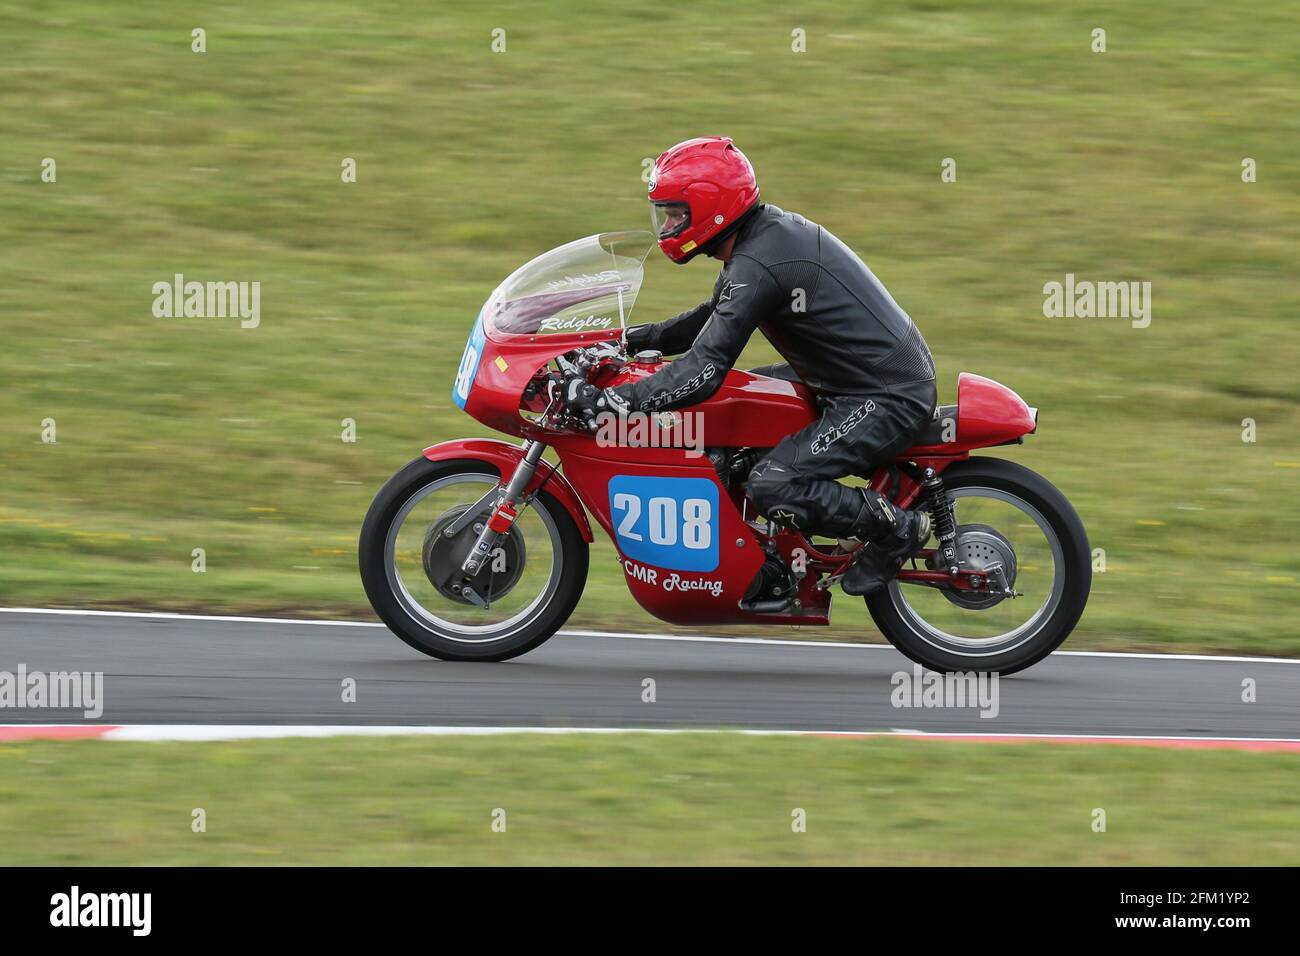 Craig Ridgley approaces The Gooseneck on a 350cc Ducati at the Cadwell Park International Classic in July 2015 Stock Photo